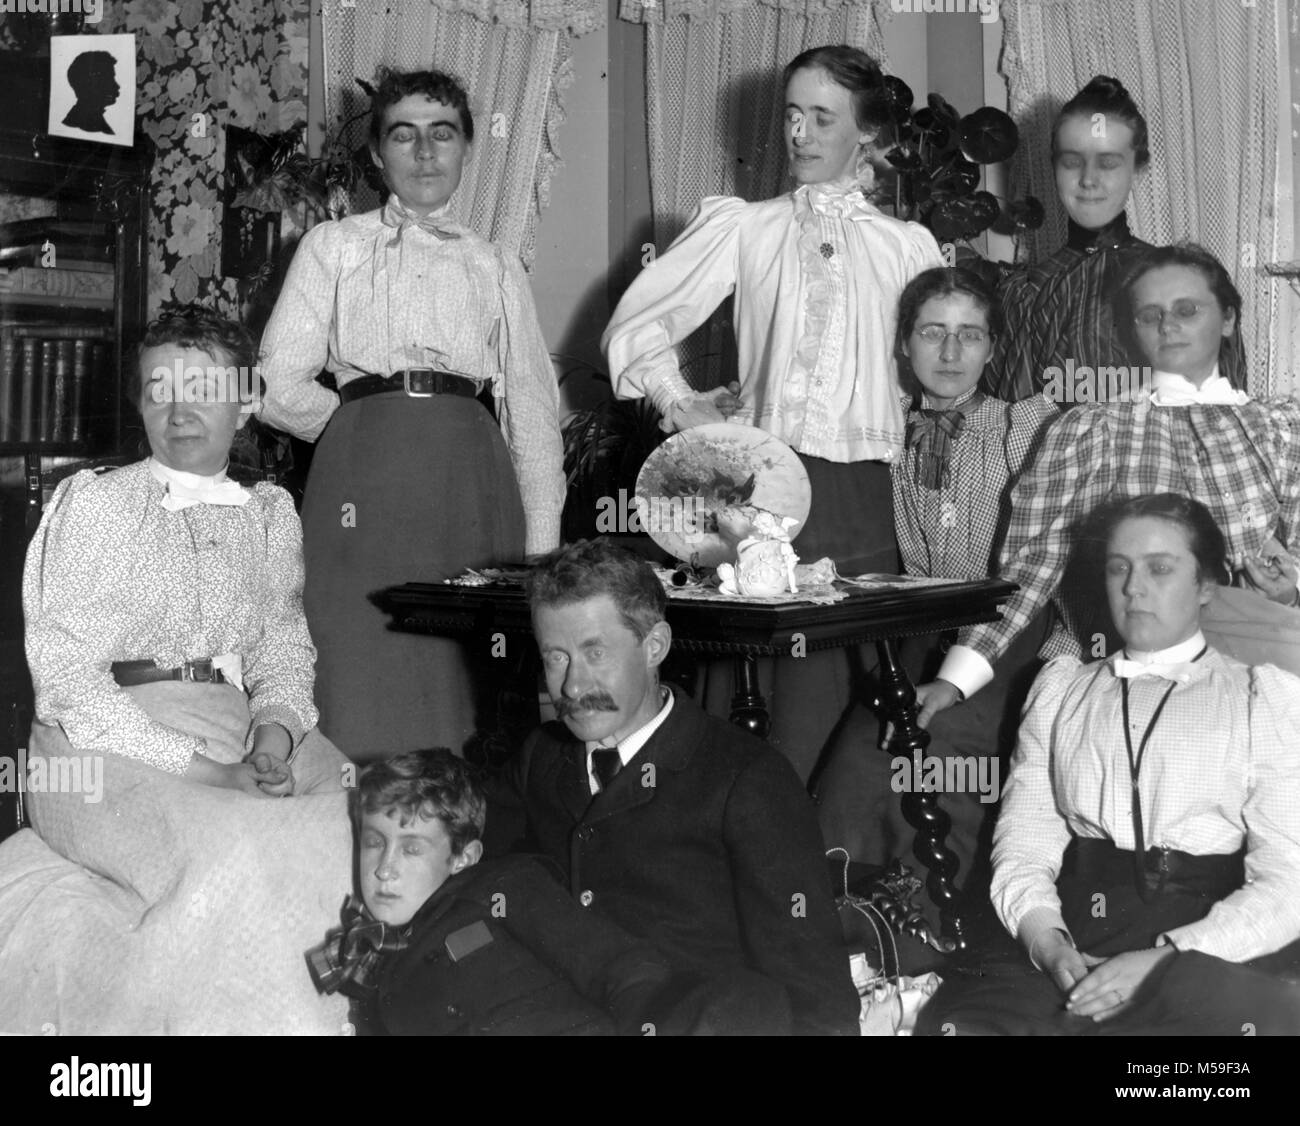 Family portrait in the parlor results in a bizarre look in their eyes due to ghosting and motion during glass negative exposure, ca. 1905. Stock Photo